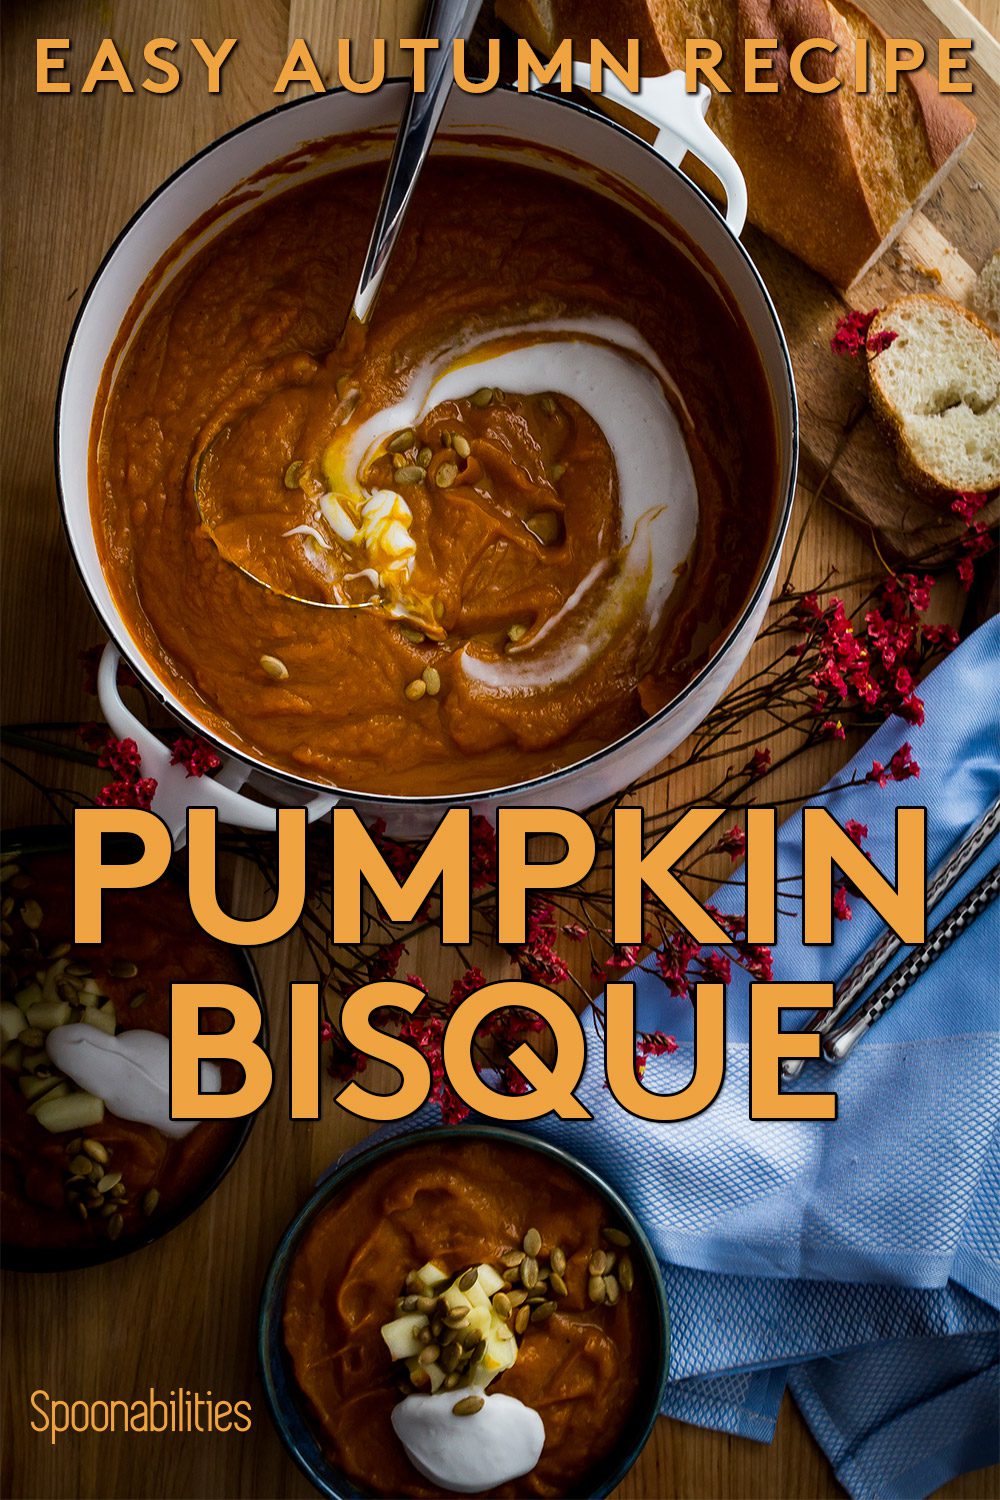 Roasted Pumpkin Bisque : Healthy Fall Soup Recipe